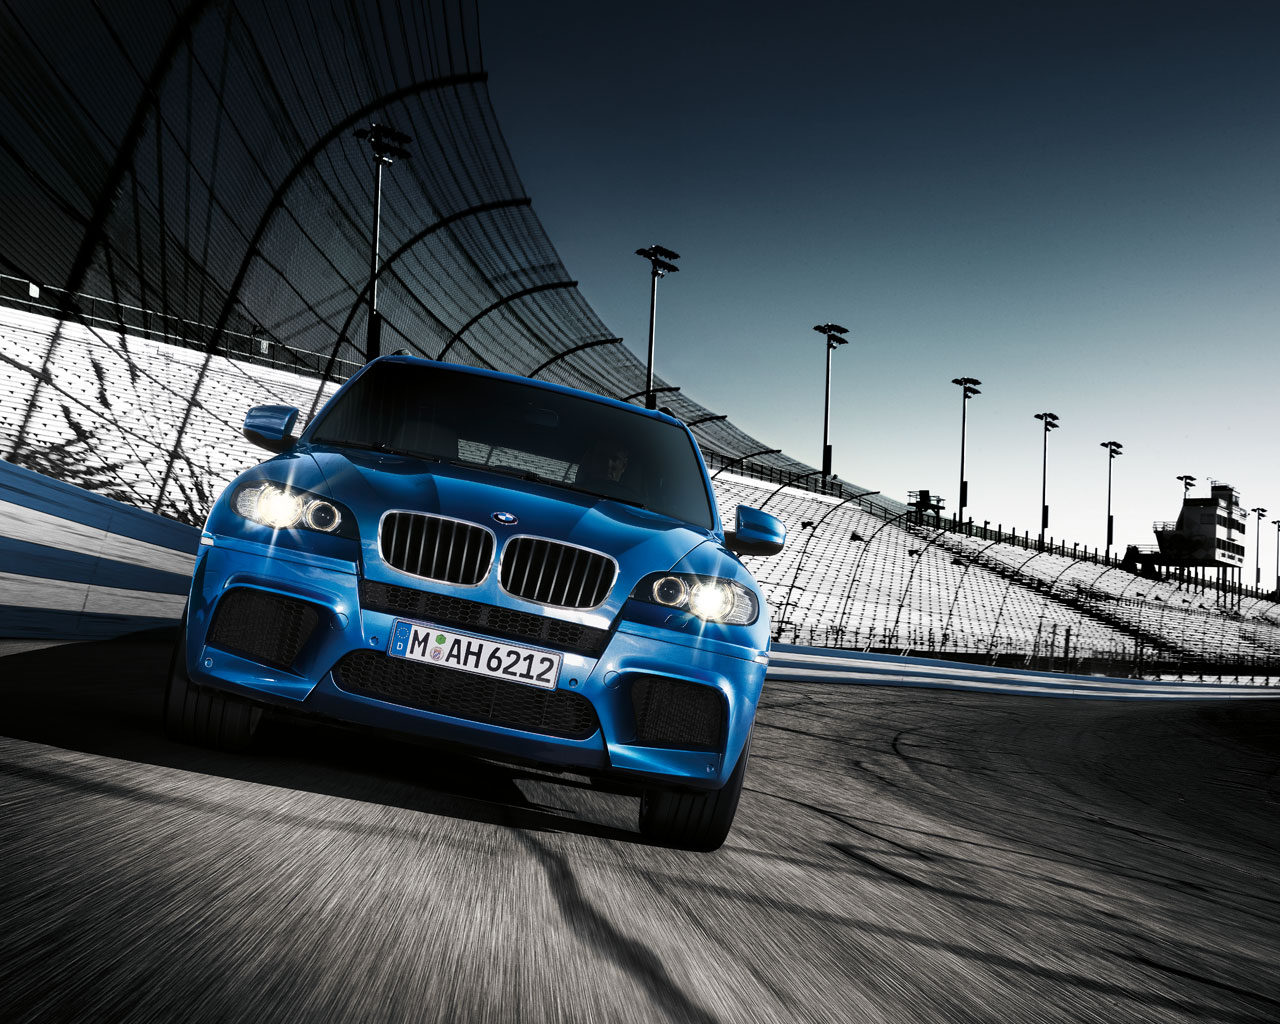 Wallpapers: BMW X6 M and BMW X5 M